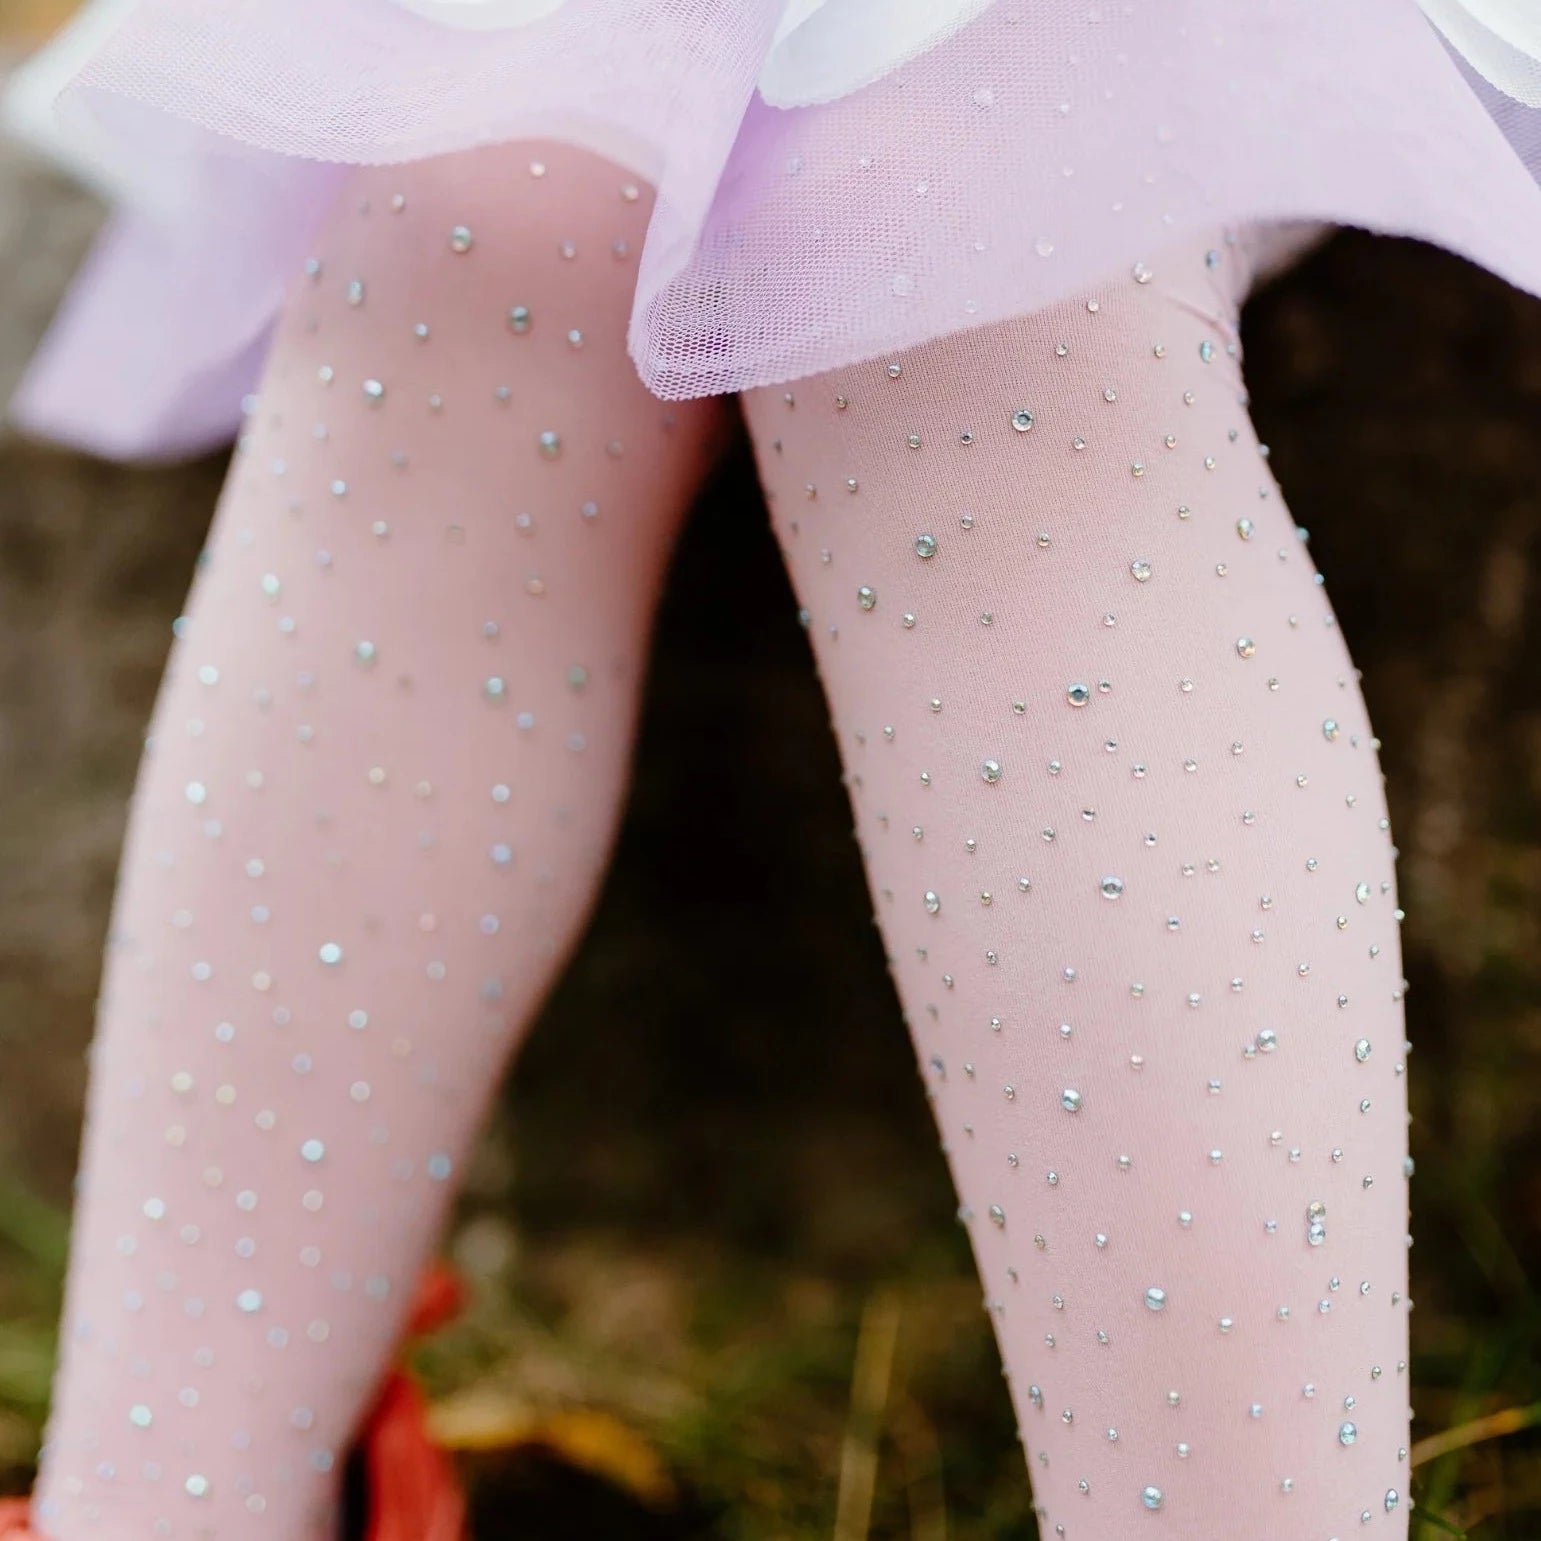 Sparkly Tights with Glittery Polka Dot Ombre Design